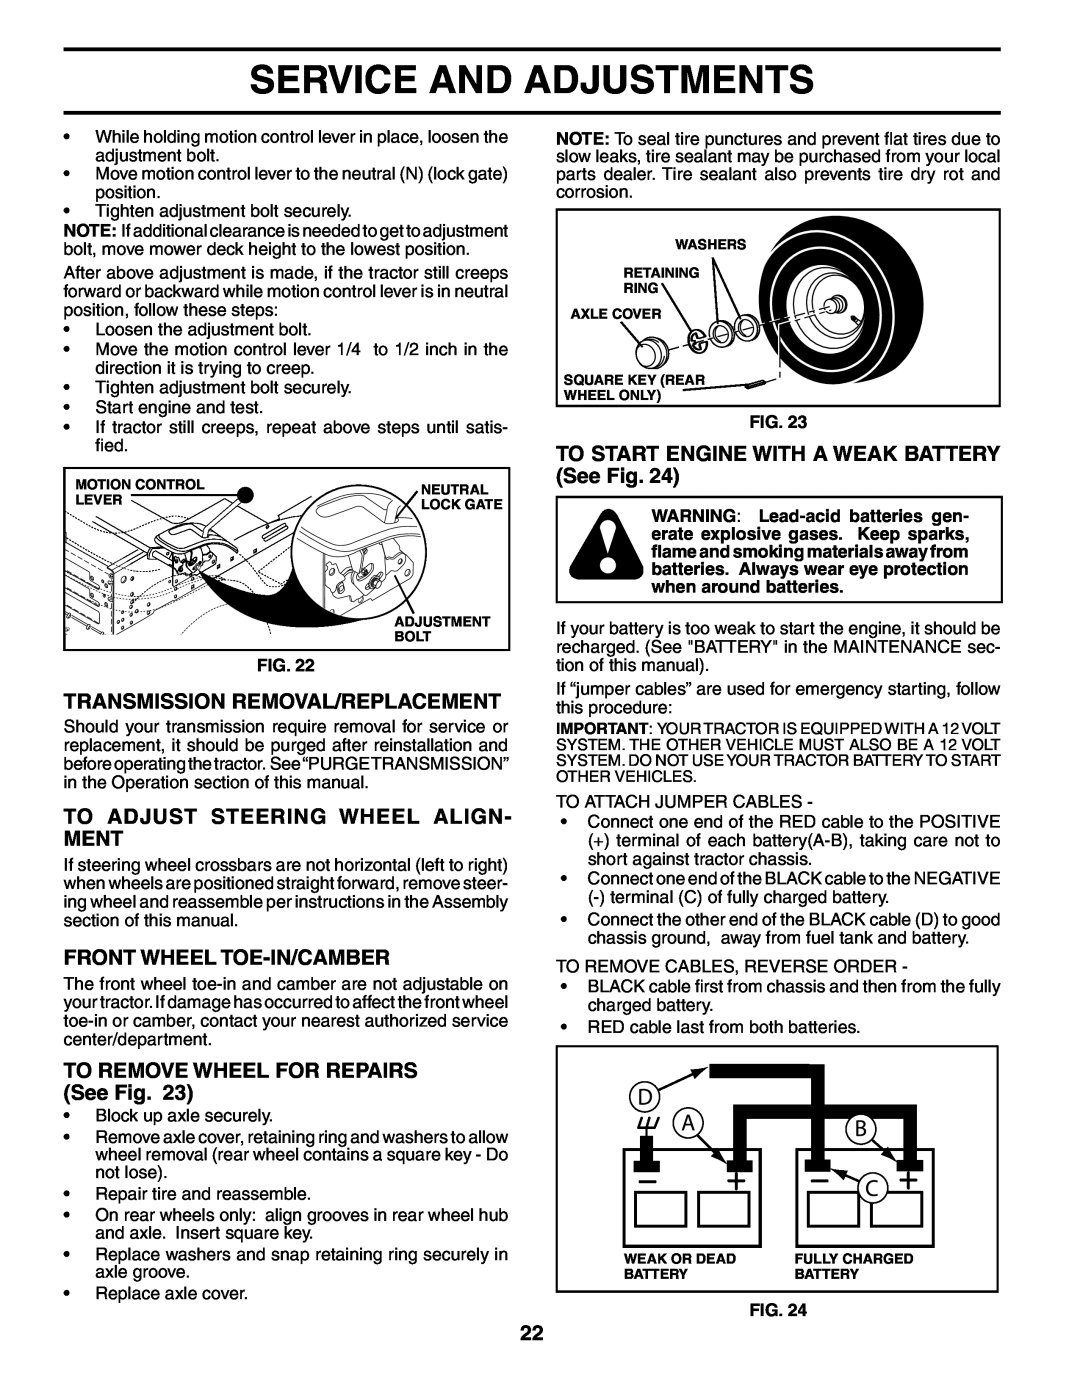 Poulan HD21H42 manual Transmission Removal/Replacement, To Adjust Steering Wheel Align- Ment, Front Wheel Toe-In/Camber 